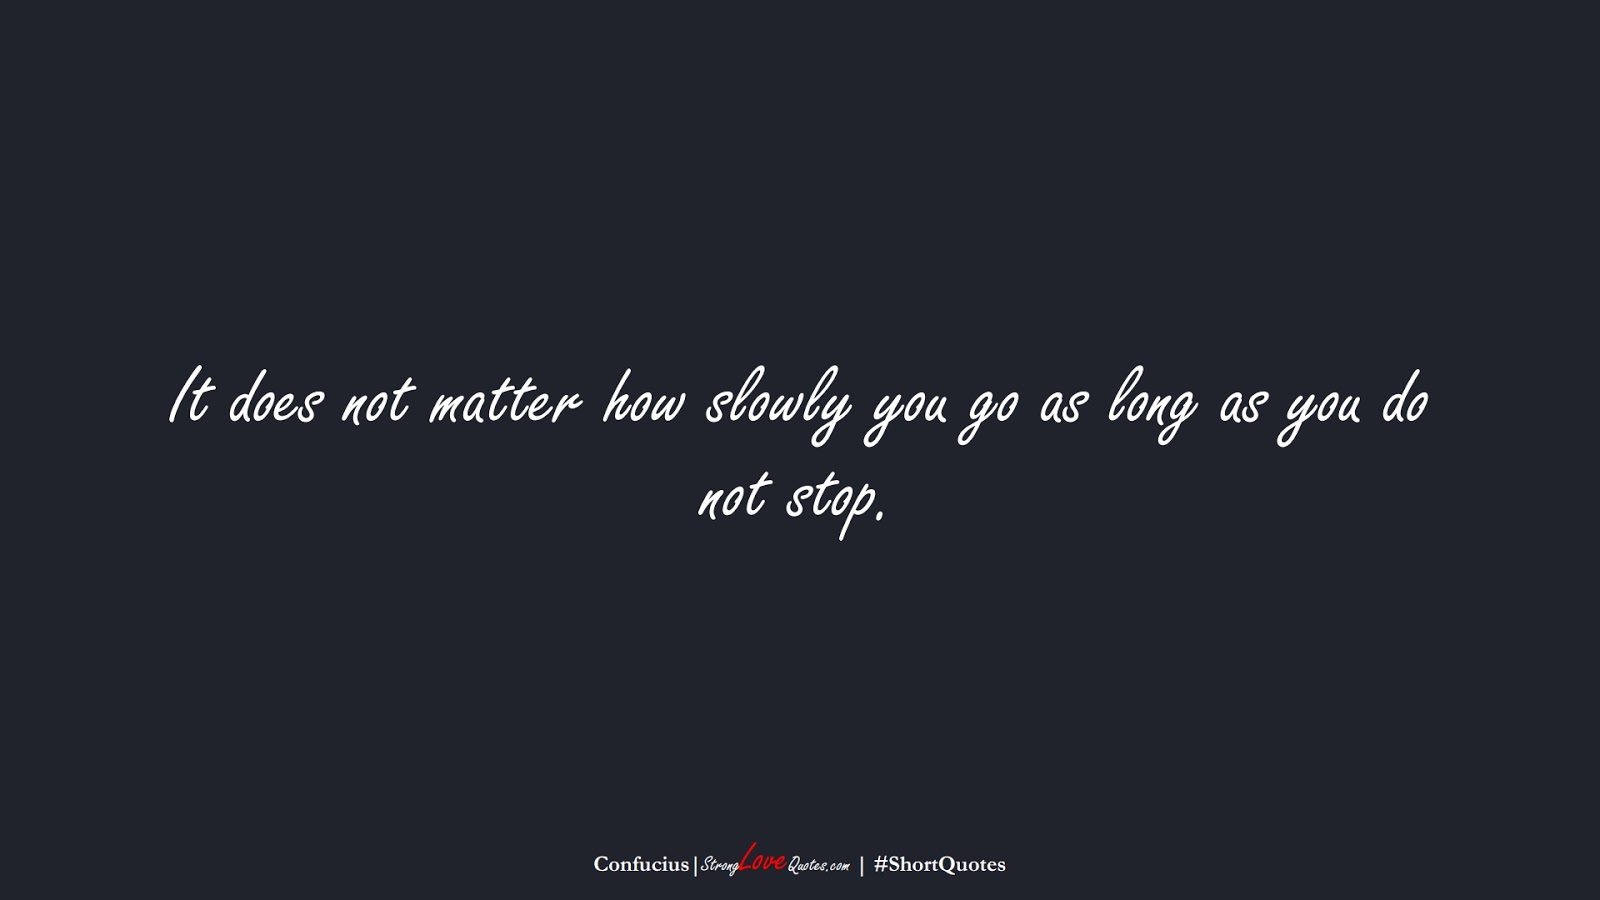 It does not matter how slowly you go as long as you do not stop. (Confucius);  #ShortQuotes